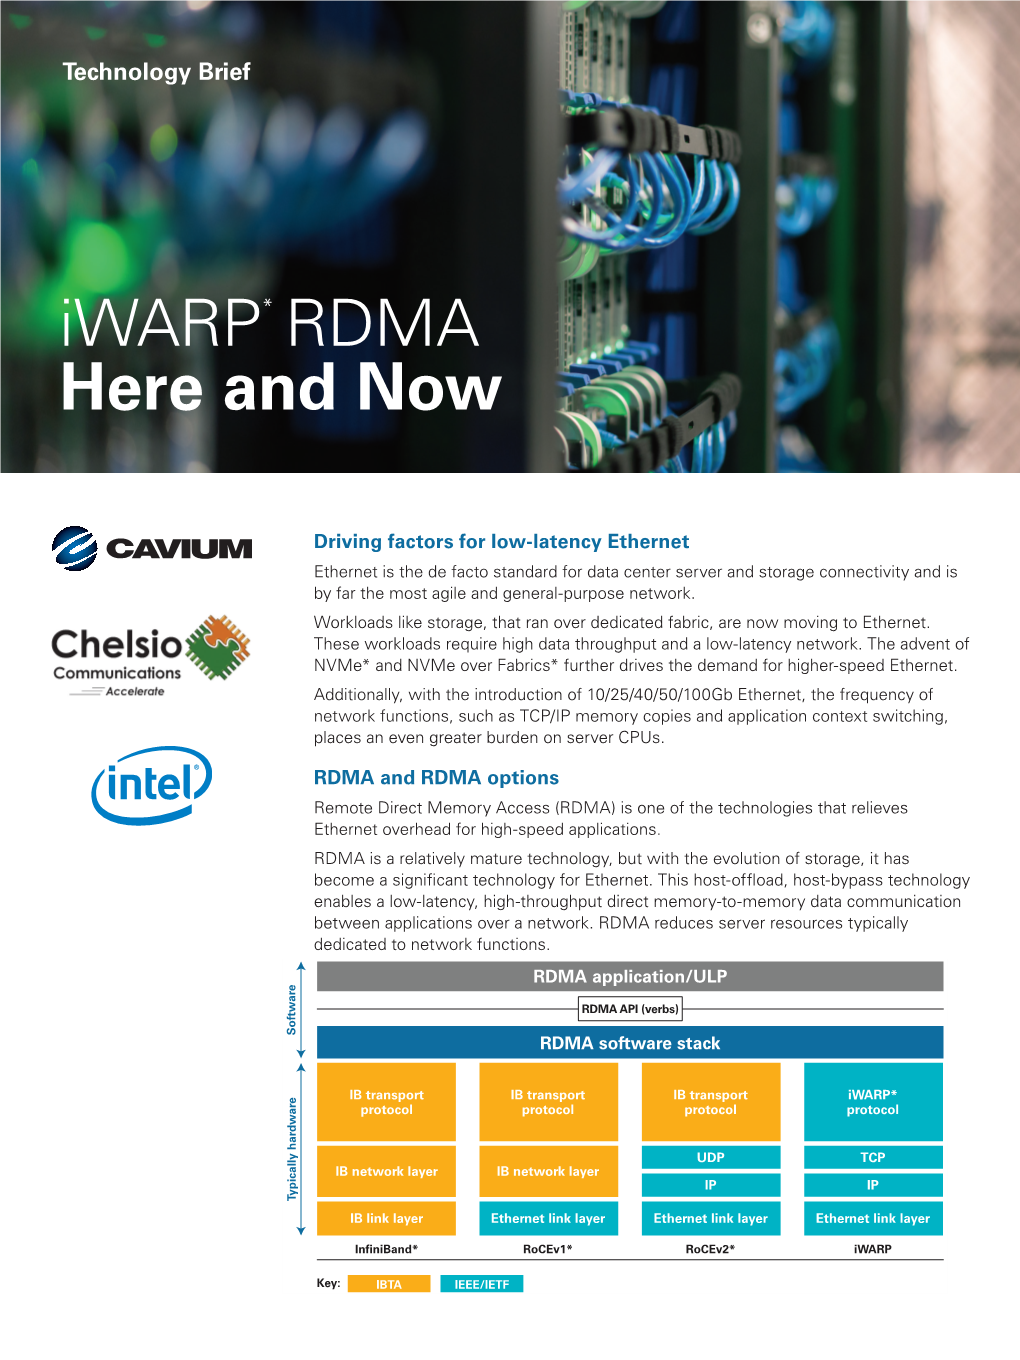 Iwarp* RDMA Here and Now Technology Brief